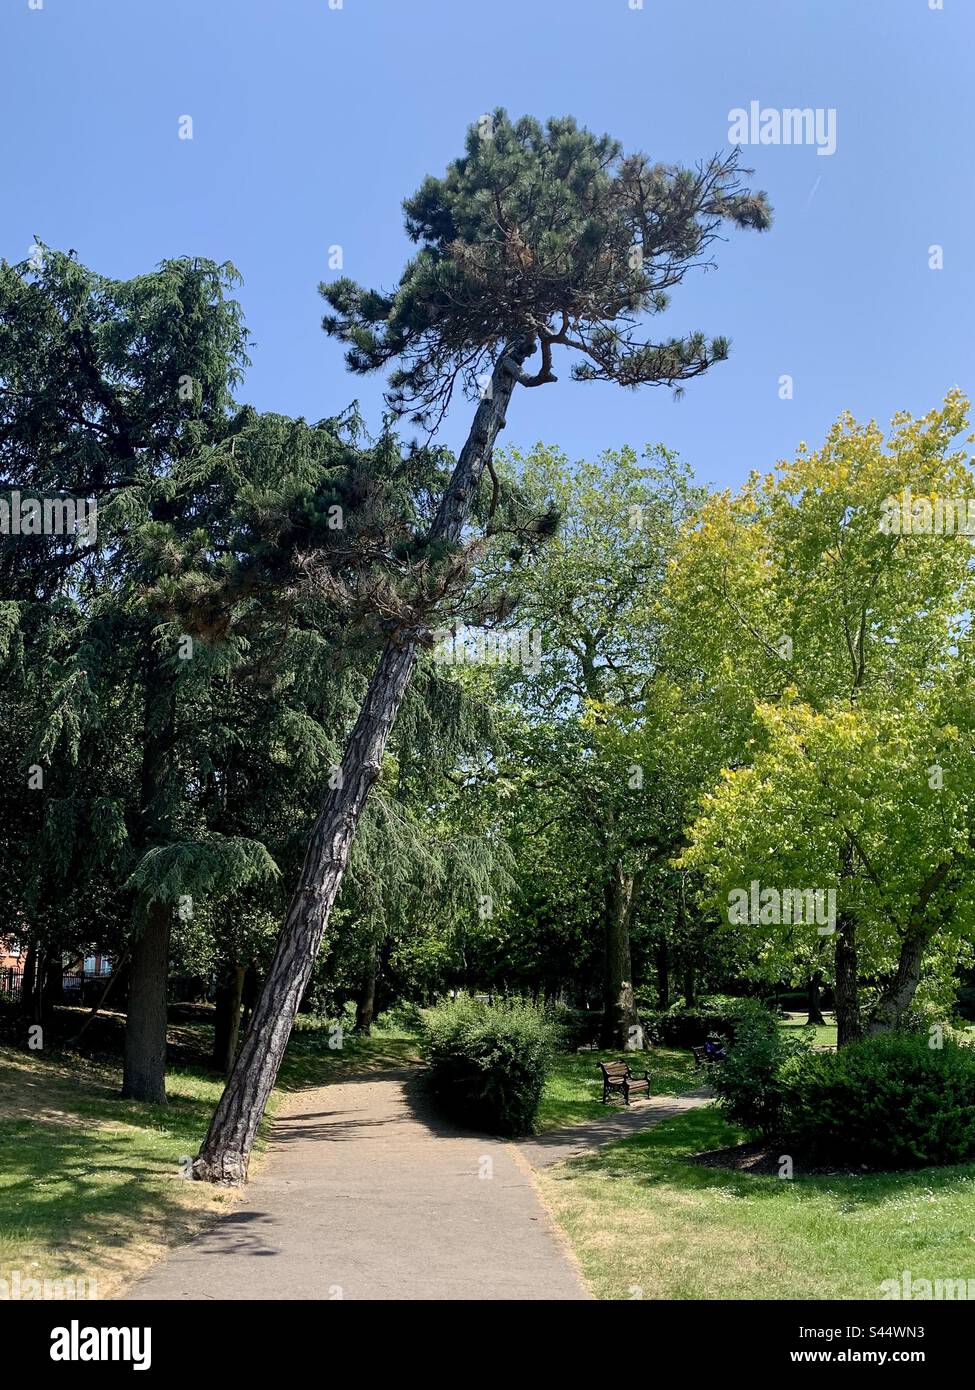 Pine tree leaning at an angle in a green sunny park, ravenscroft park, Barnet Stock Photo